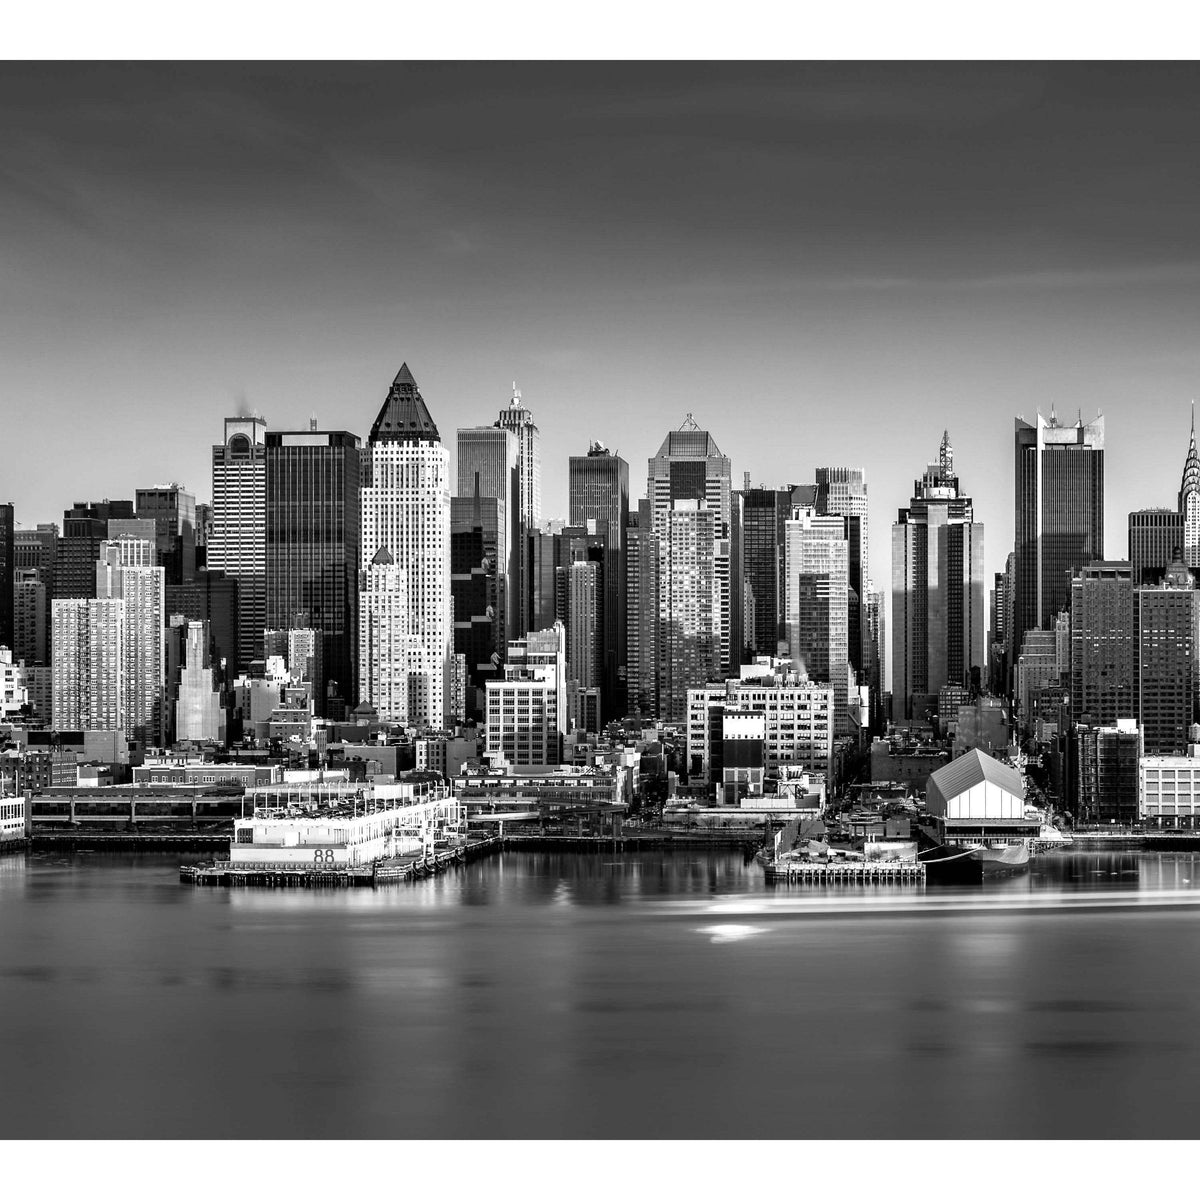 New York Black and White Large Art №53 Ready to Hang Canvas Print